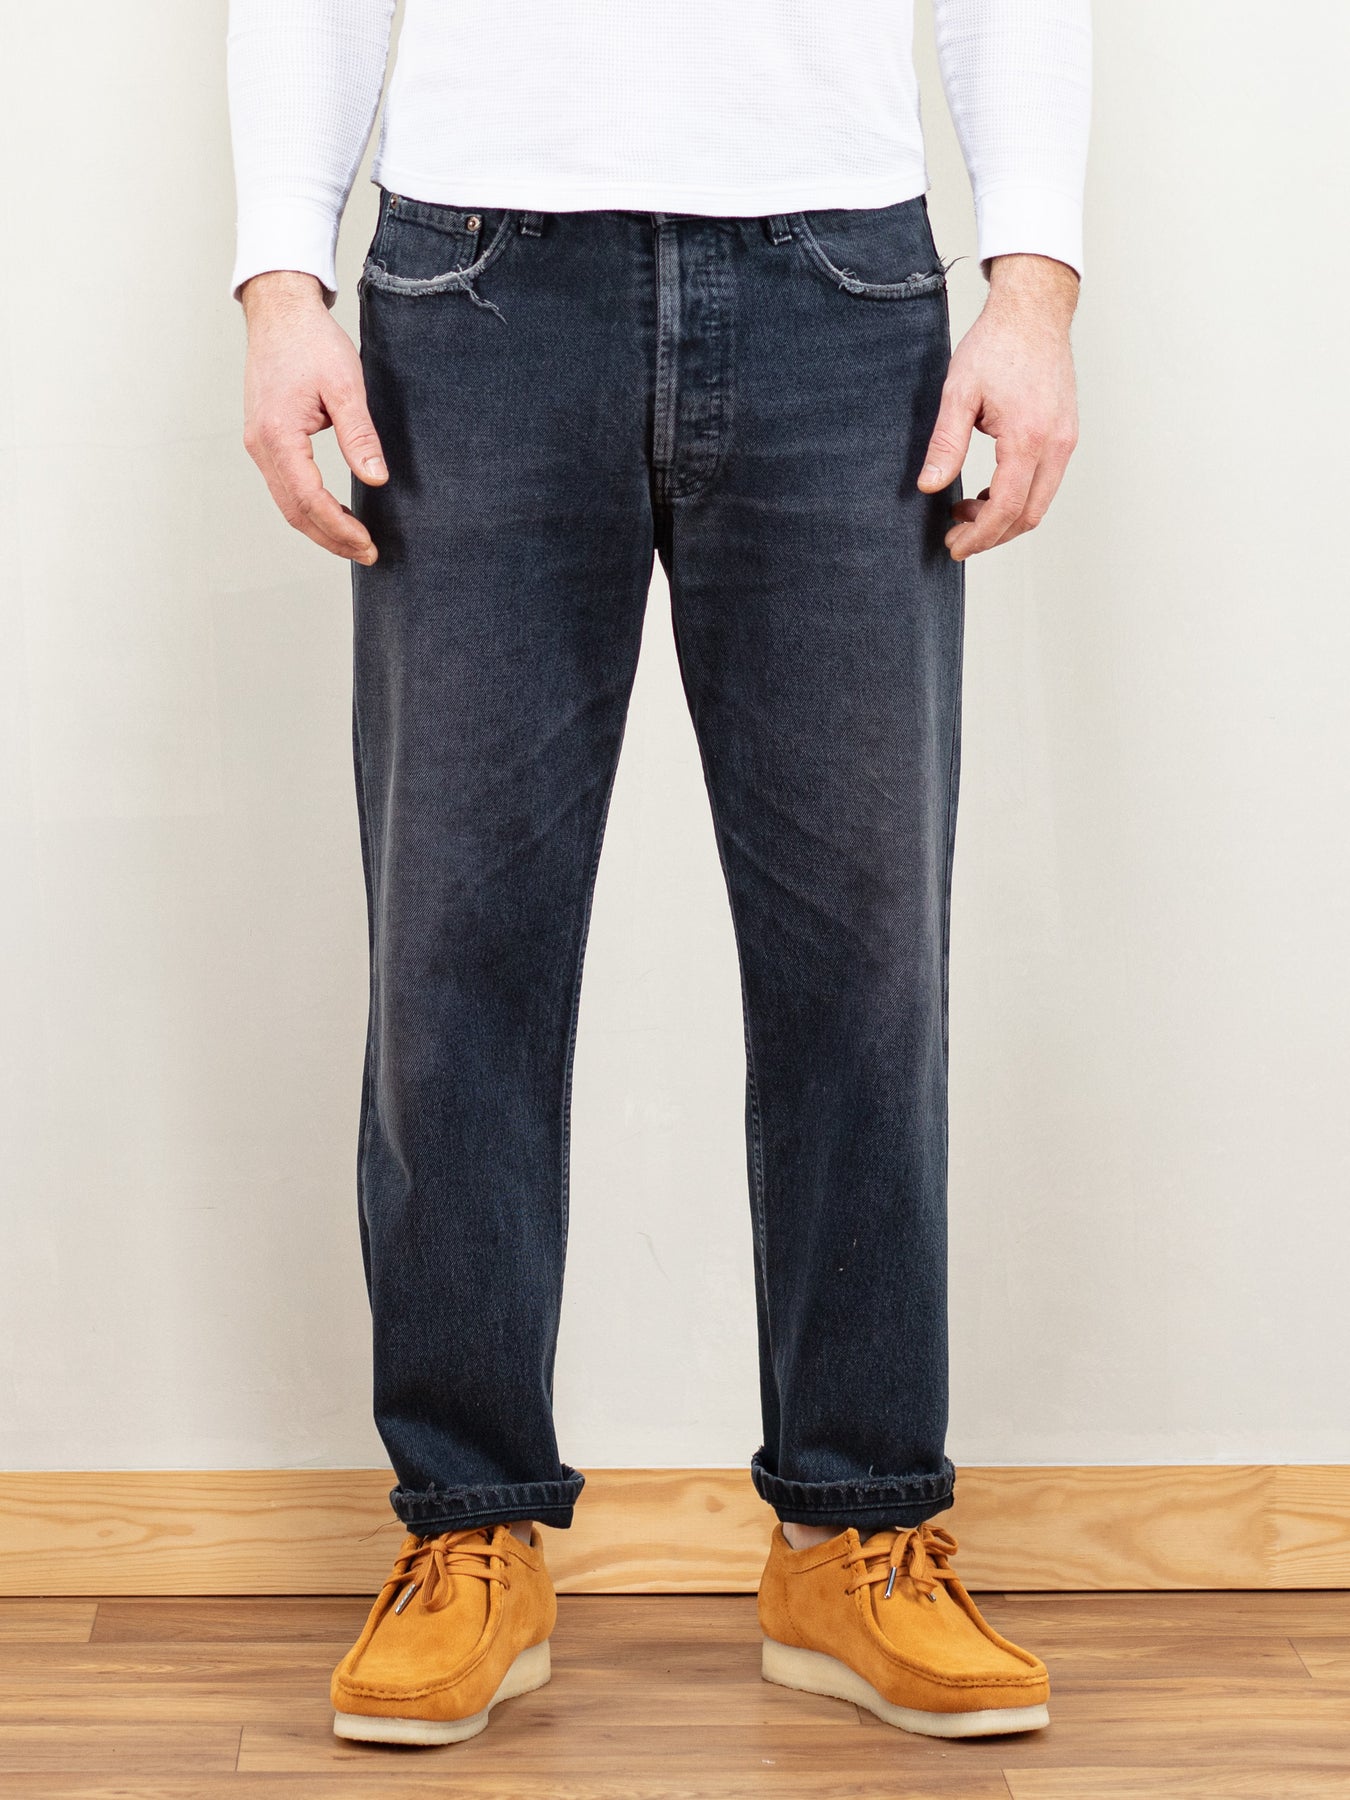 Shop for Vintage Made in USA Levis 501 Jeans | NORTHERN GRIP